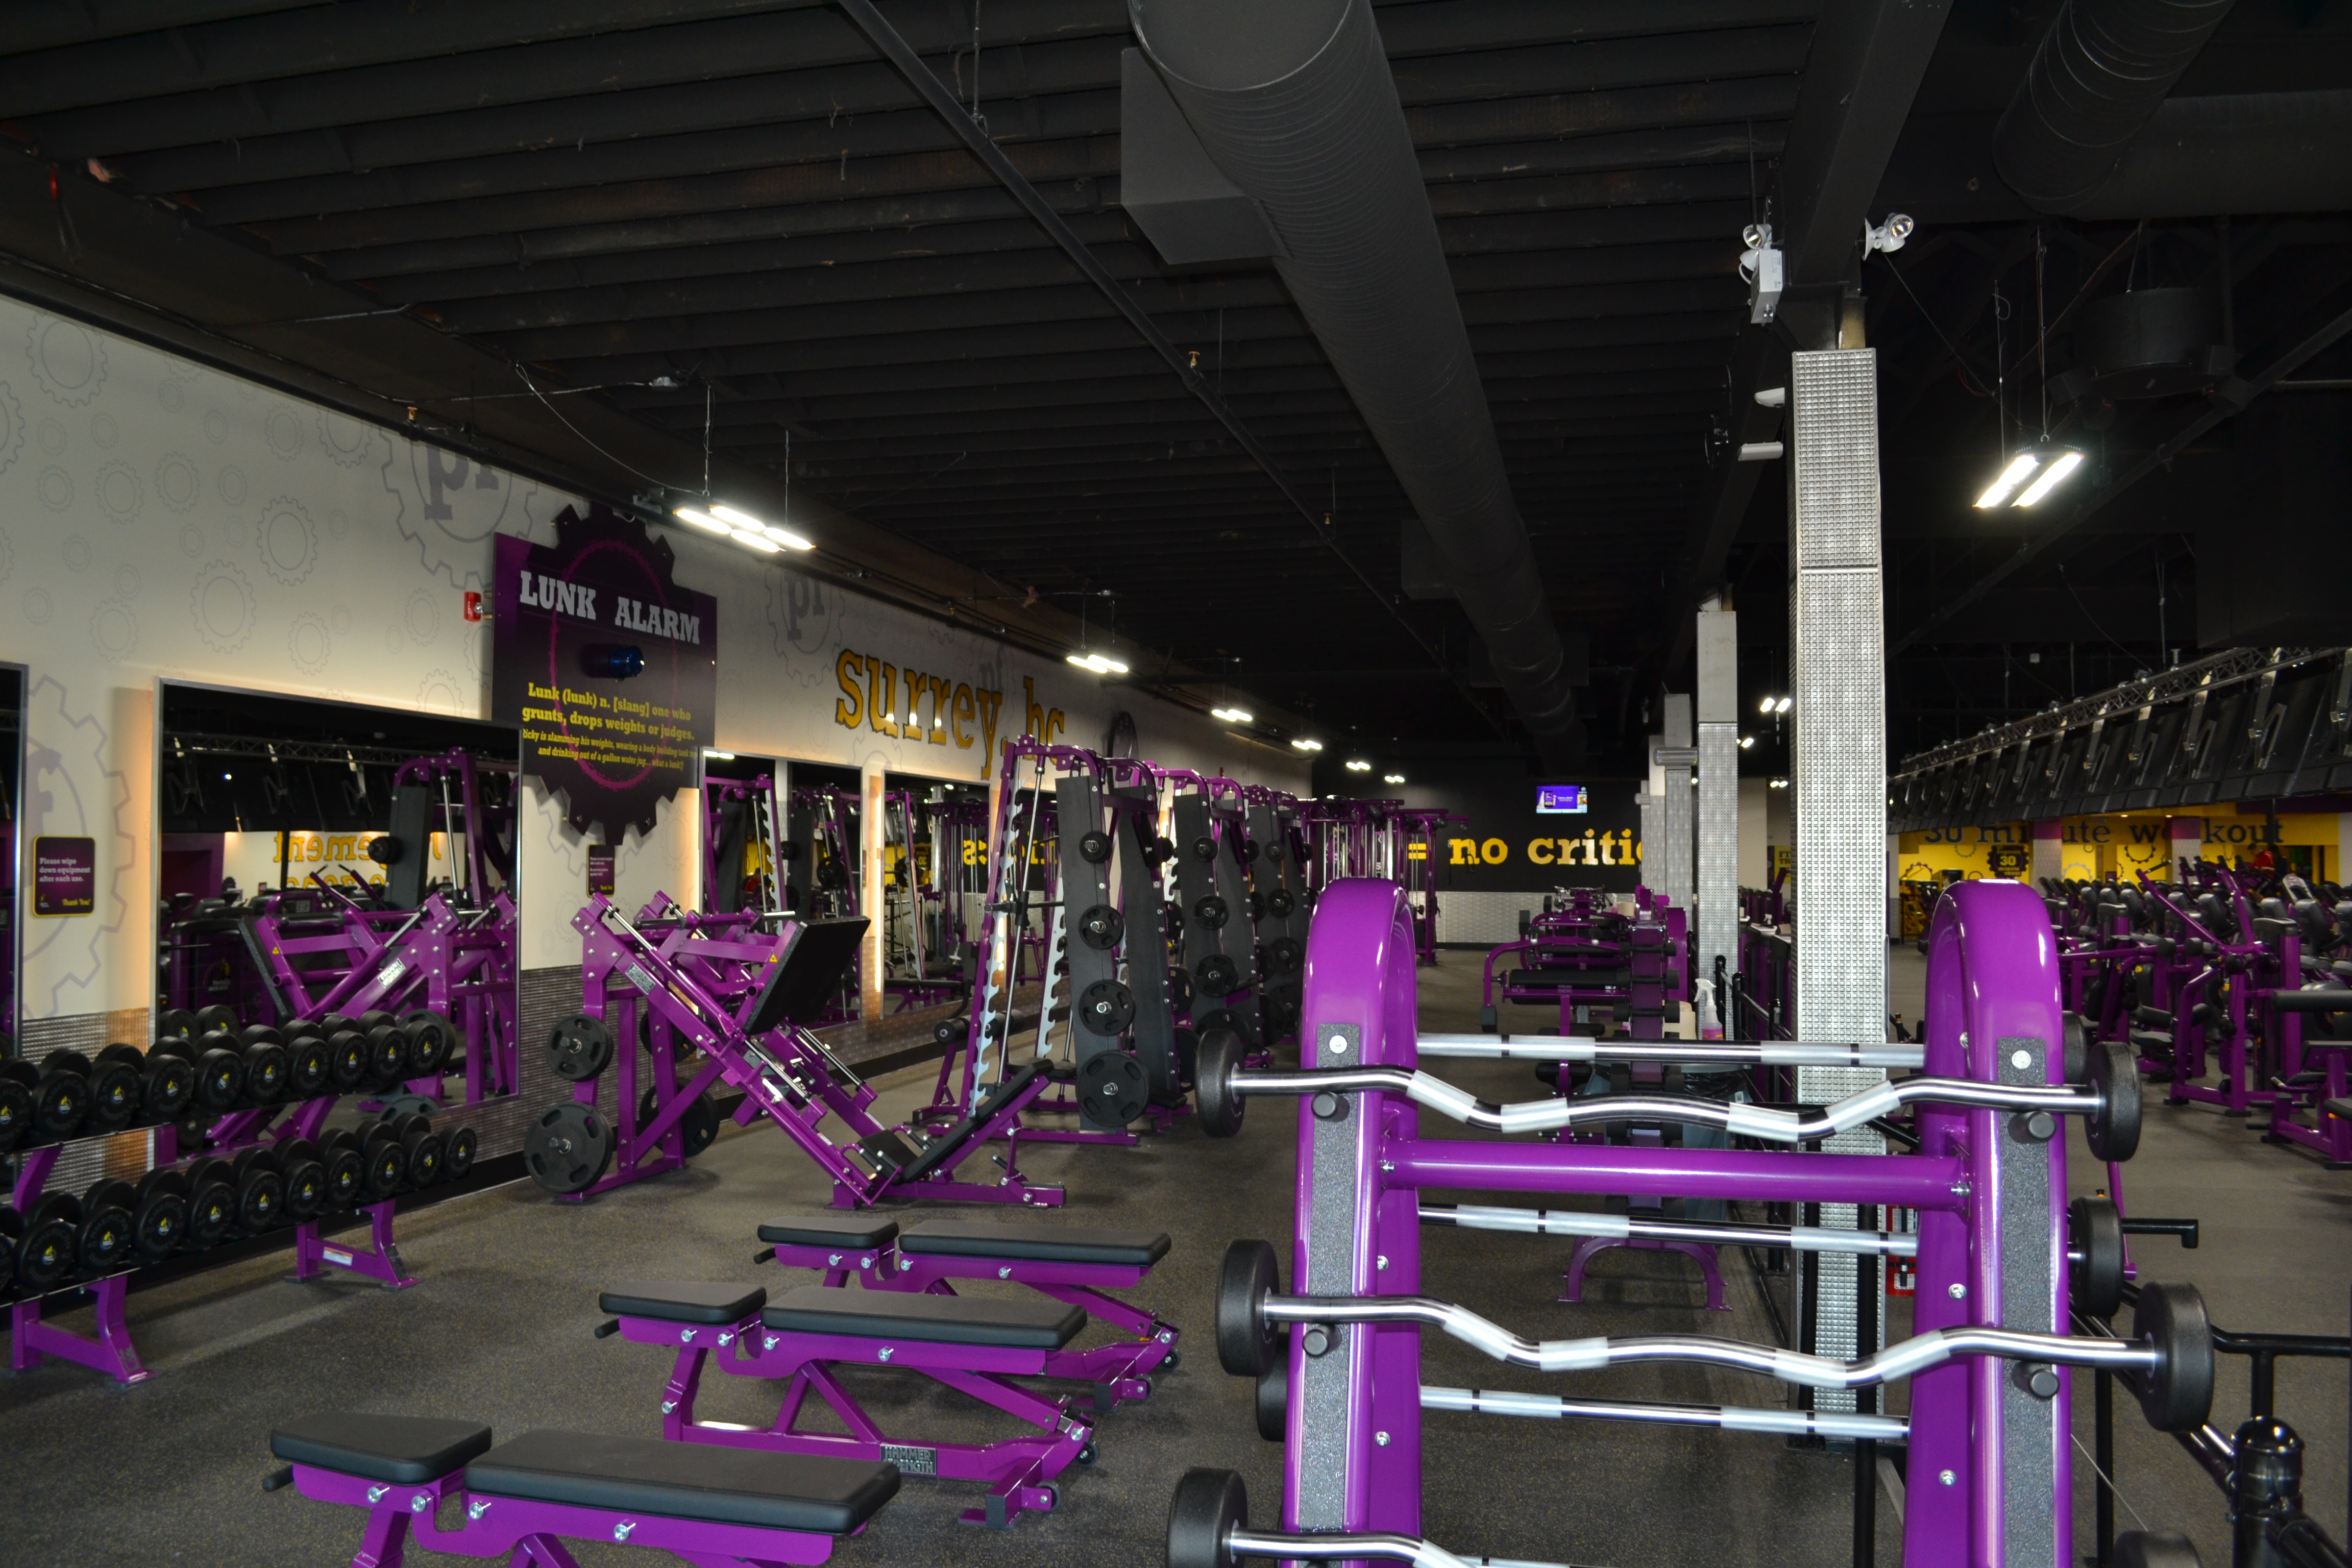 30 Minute Is planet fitness still open 24 7 for Build Muscle